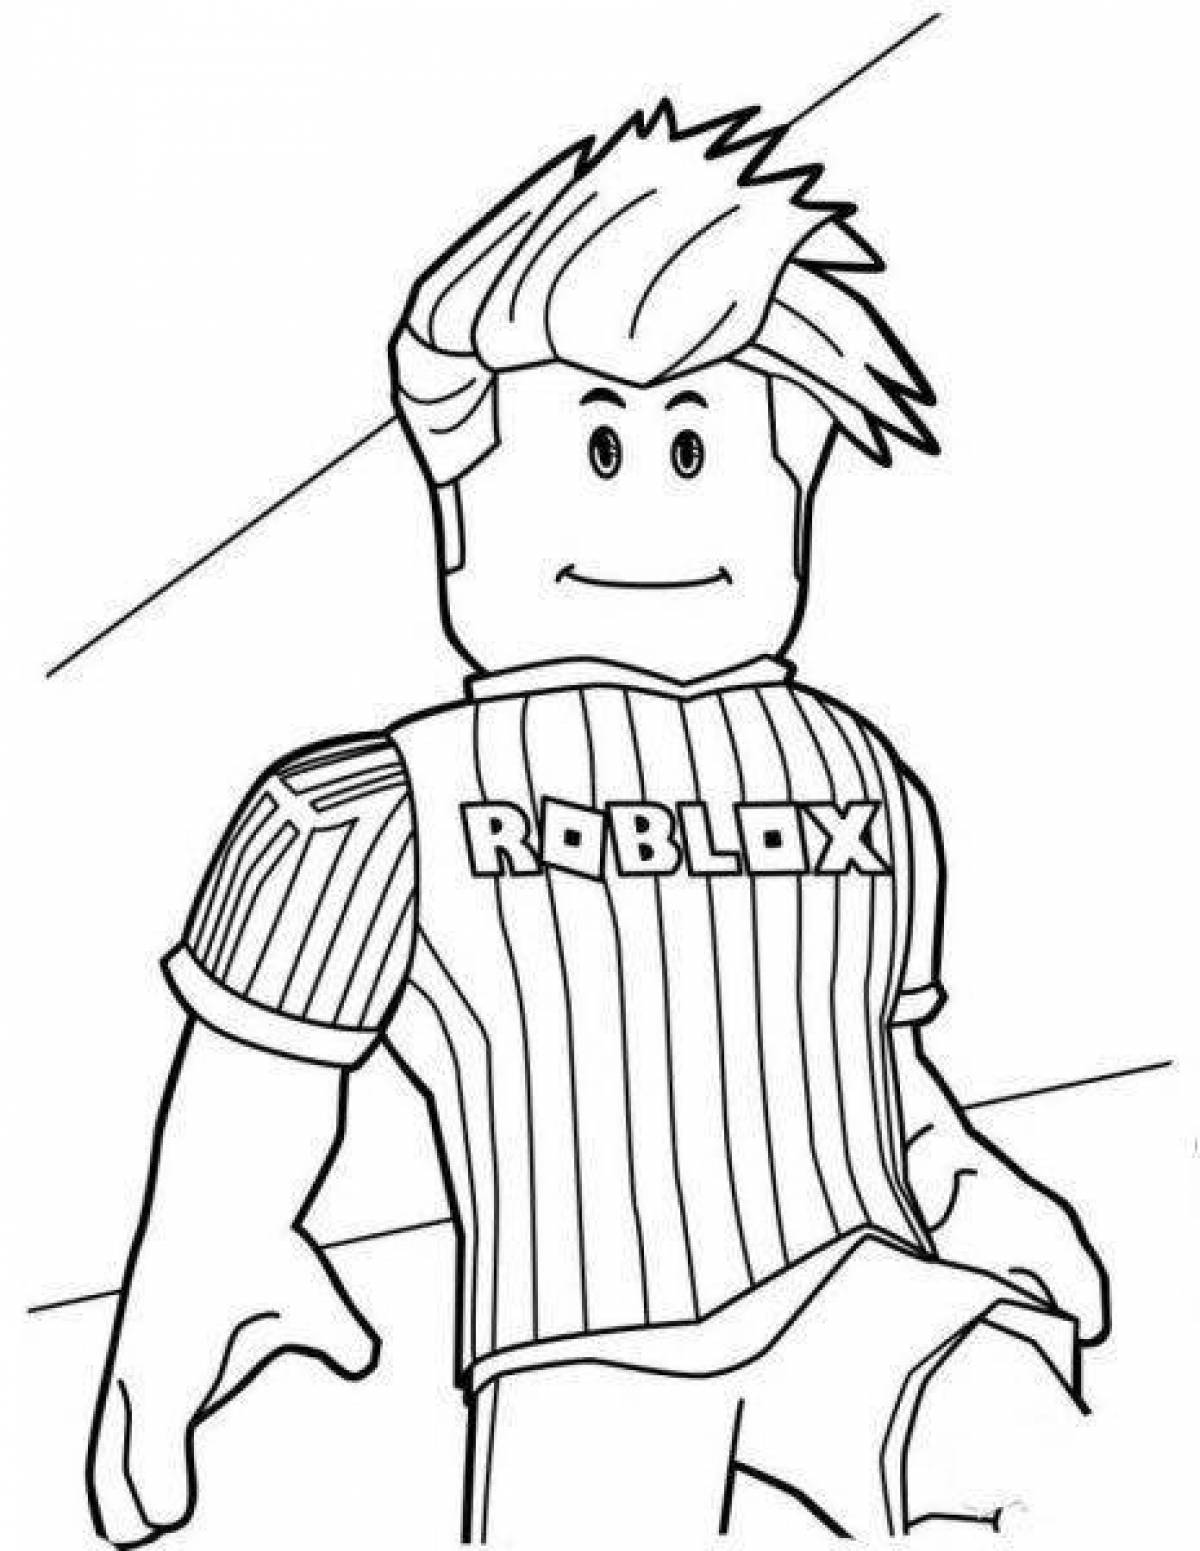 Roblox cheerful man coloring page